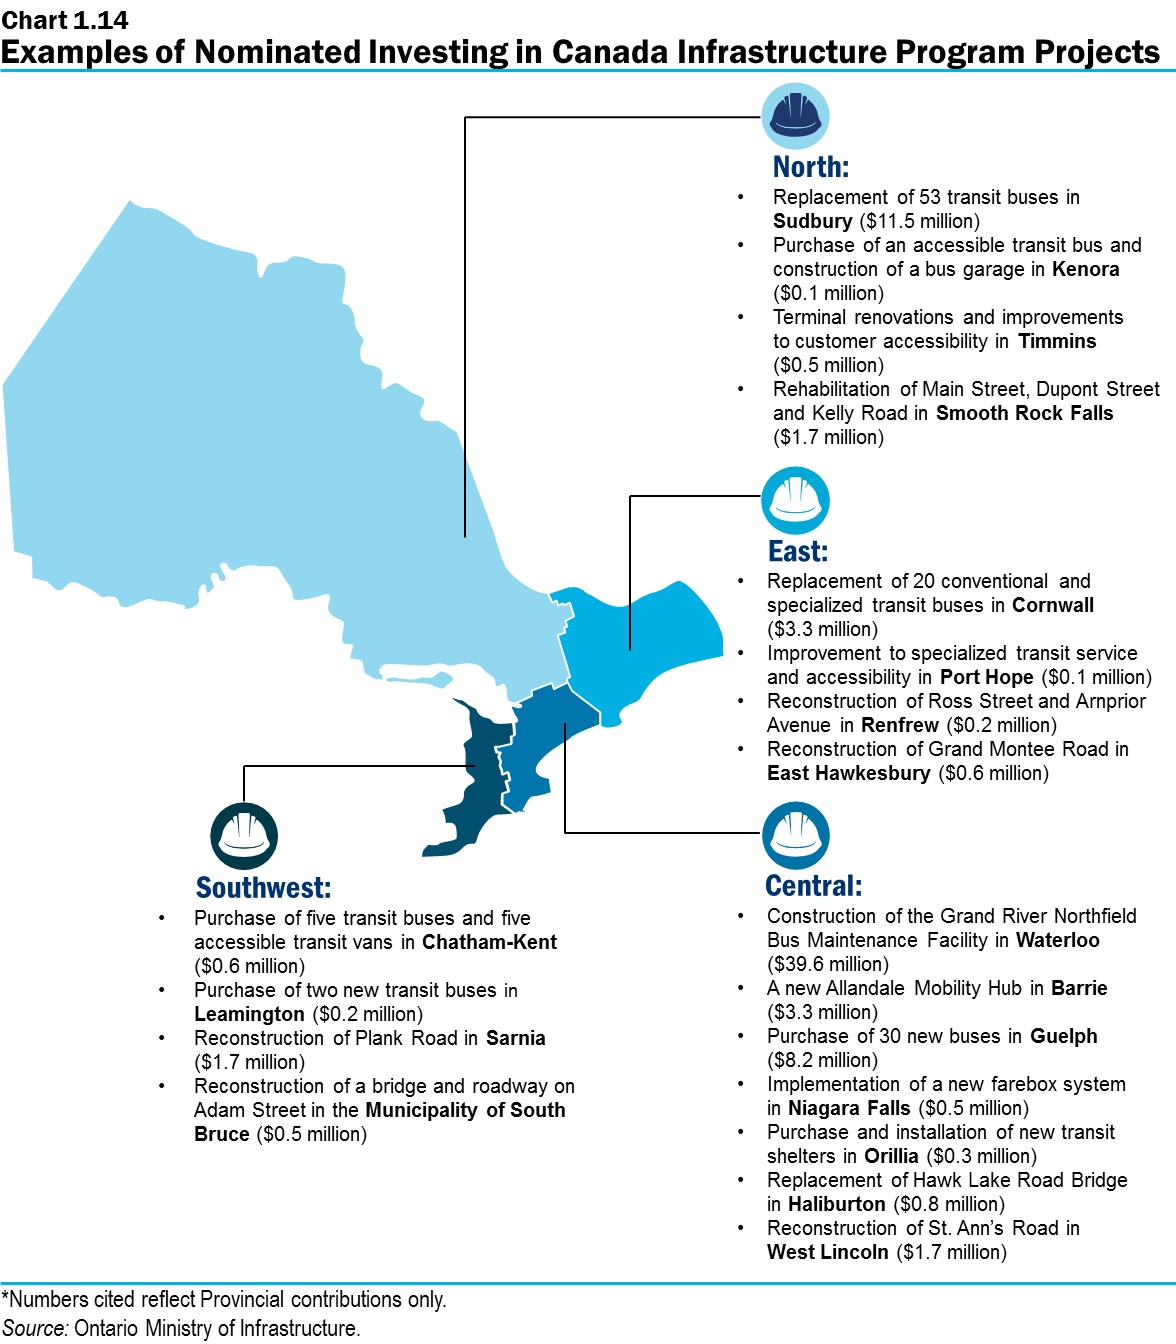 Chart 1.14: Examples of Nominated Investing in Canada Infrastructure Program Projects